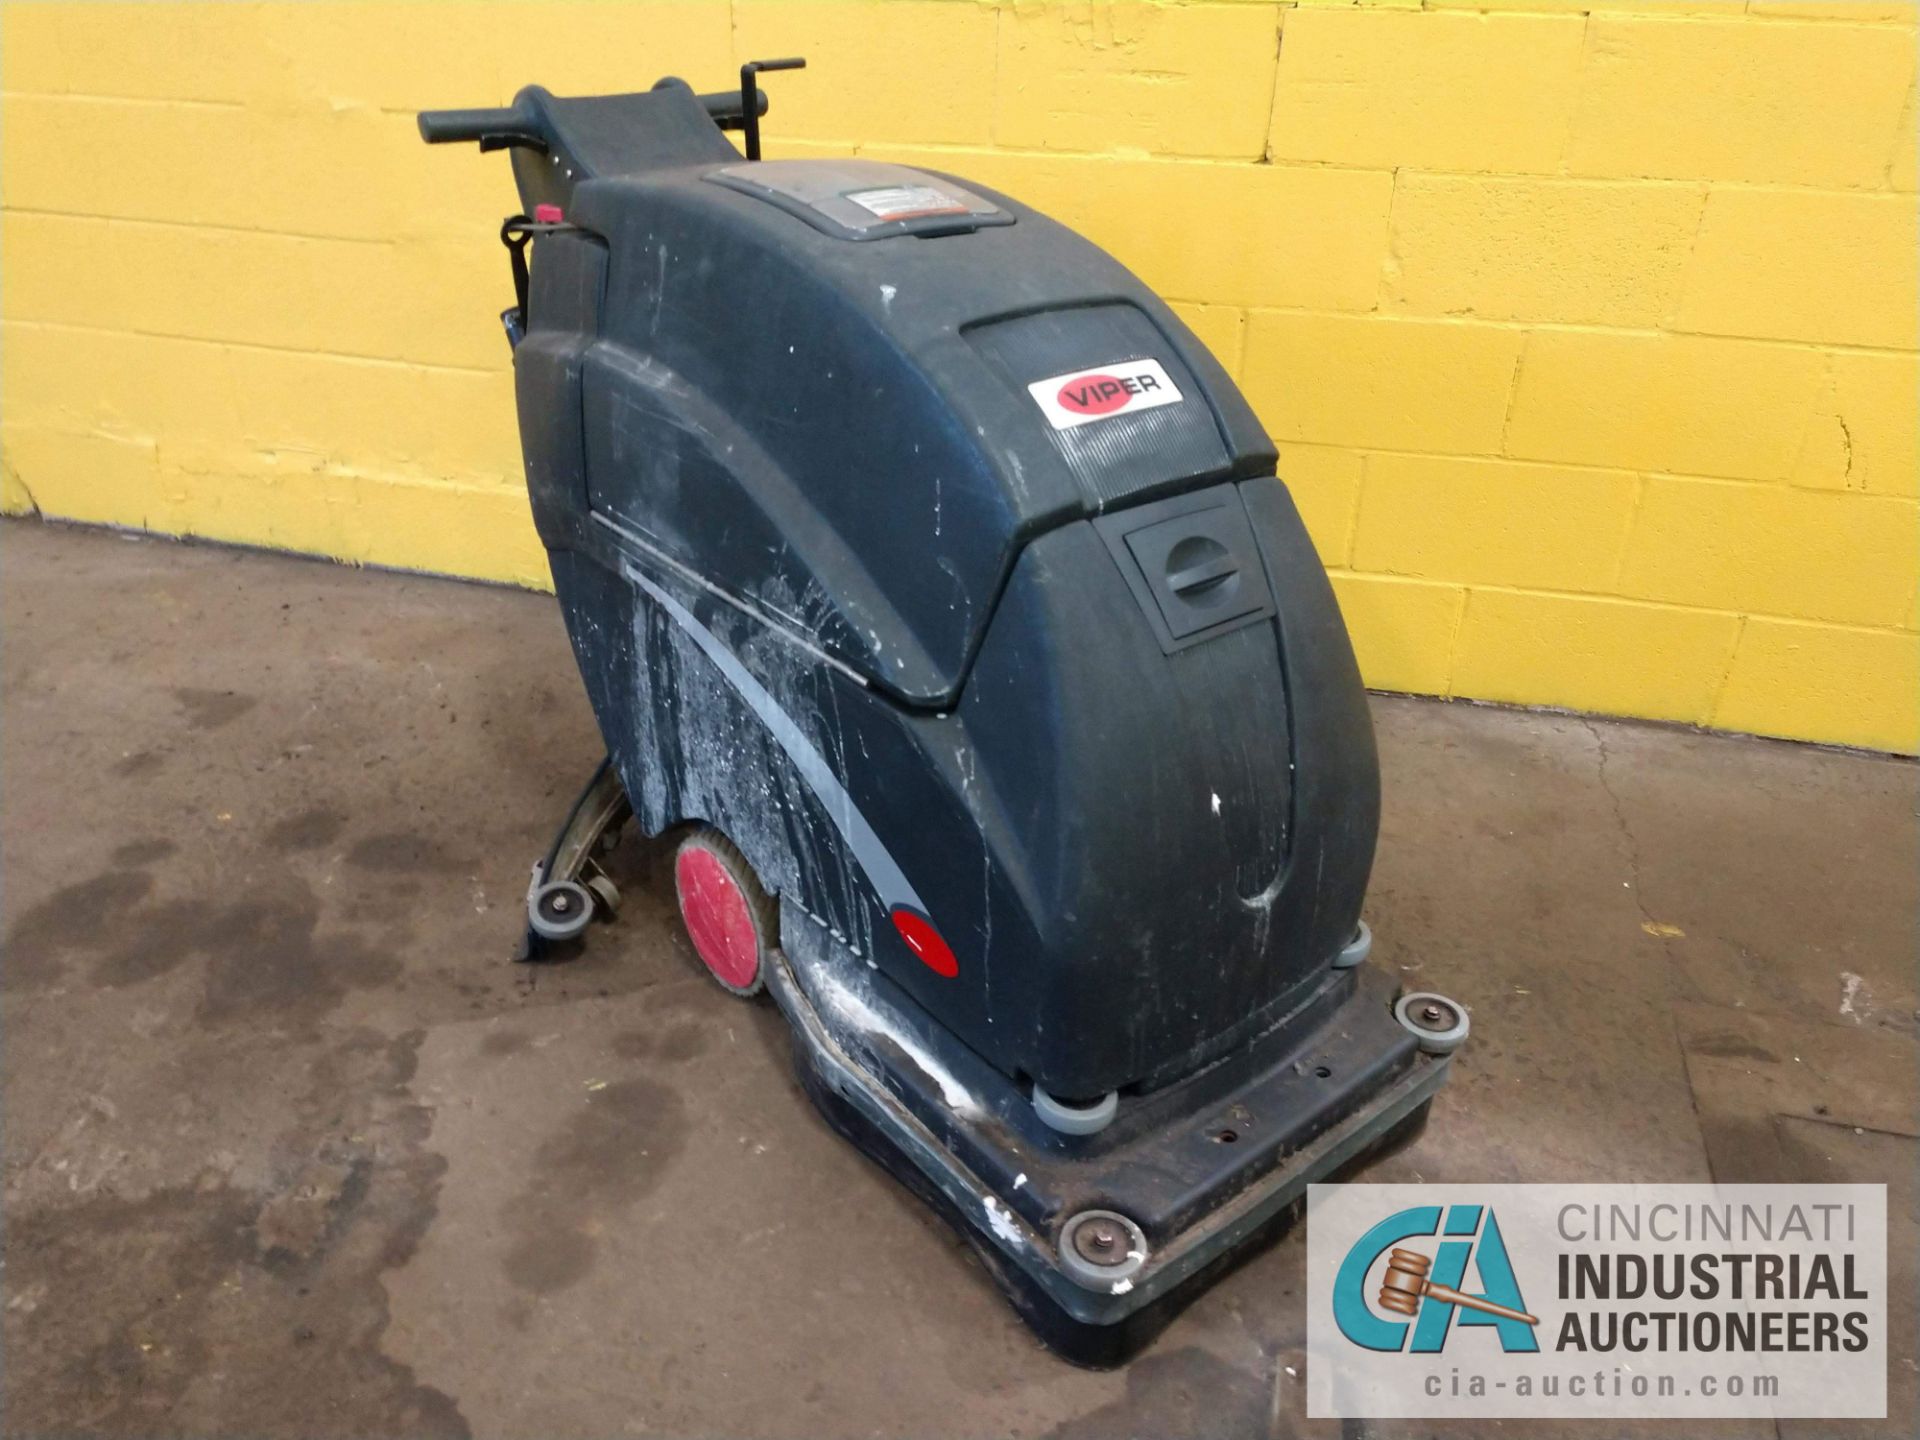 VIPER MODEL FANG20 FLOOR SCRUBBER - $20.00 Rigging Fee Due to Onsite Rigger - Located in Toledo,